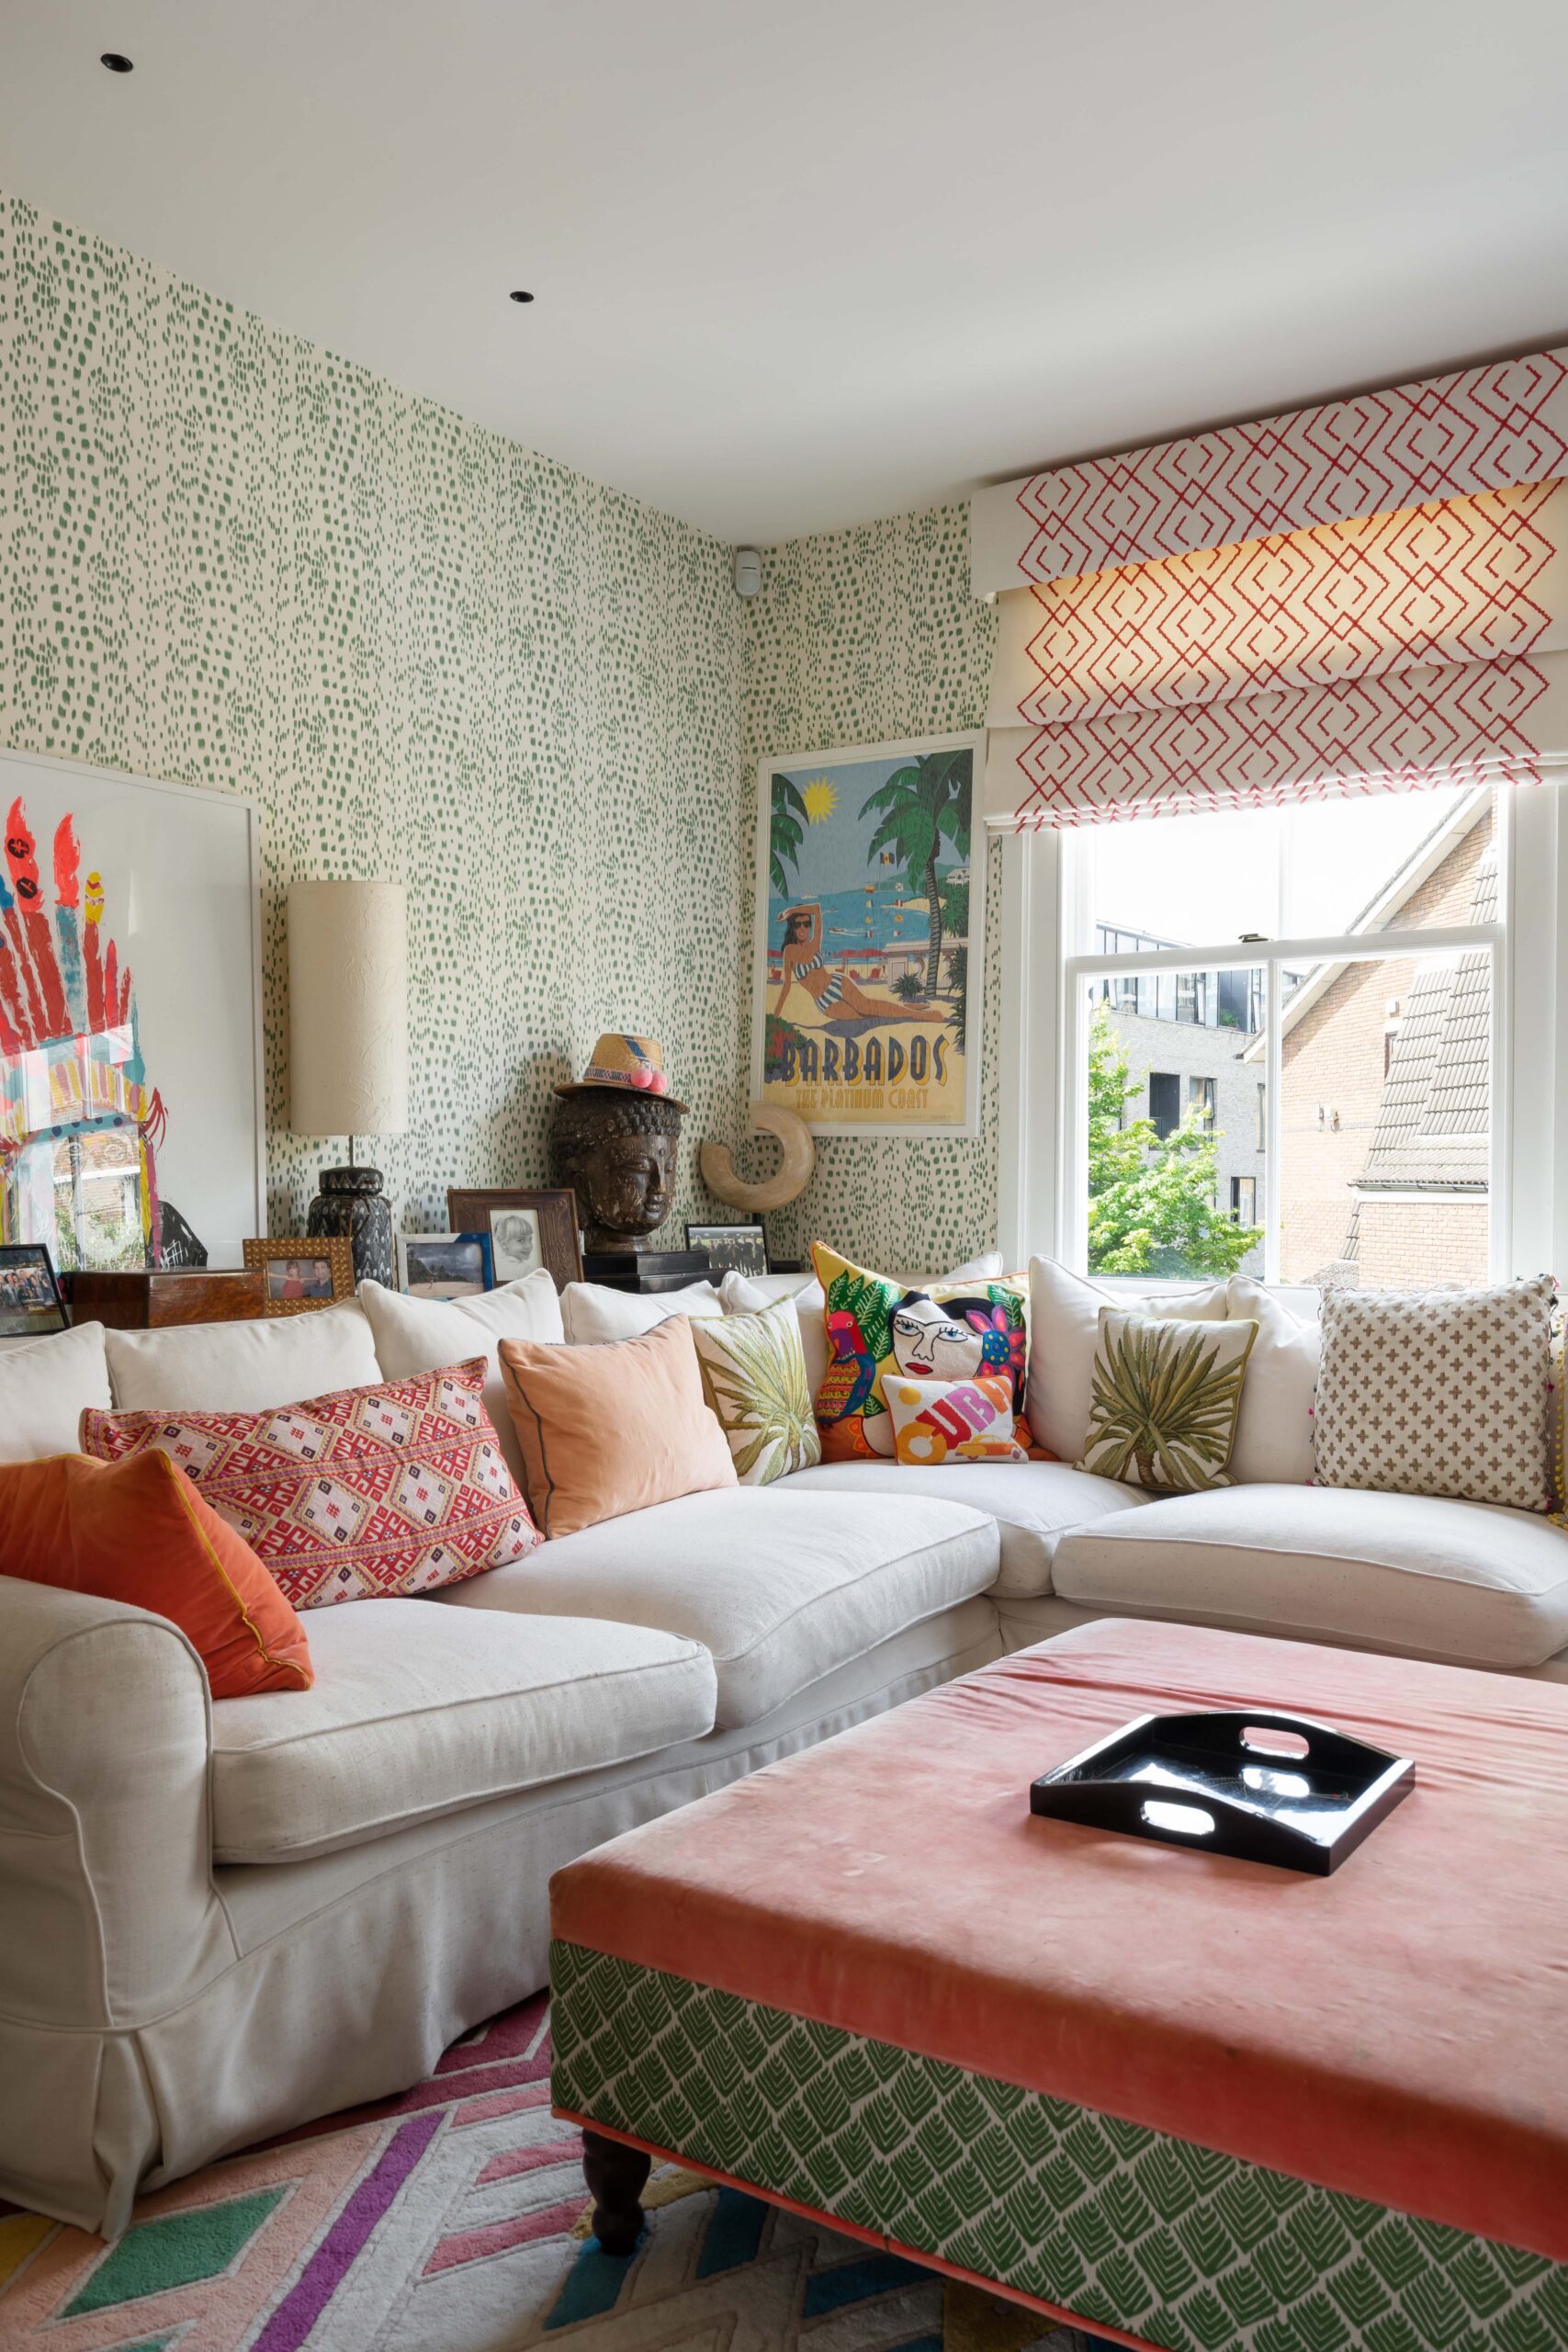 Kensington Park Road living room with pale sofa and patterned wallpaper by Barlow & Barlow